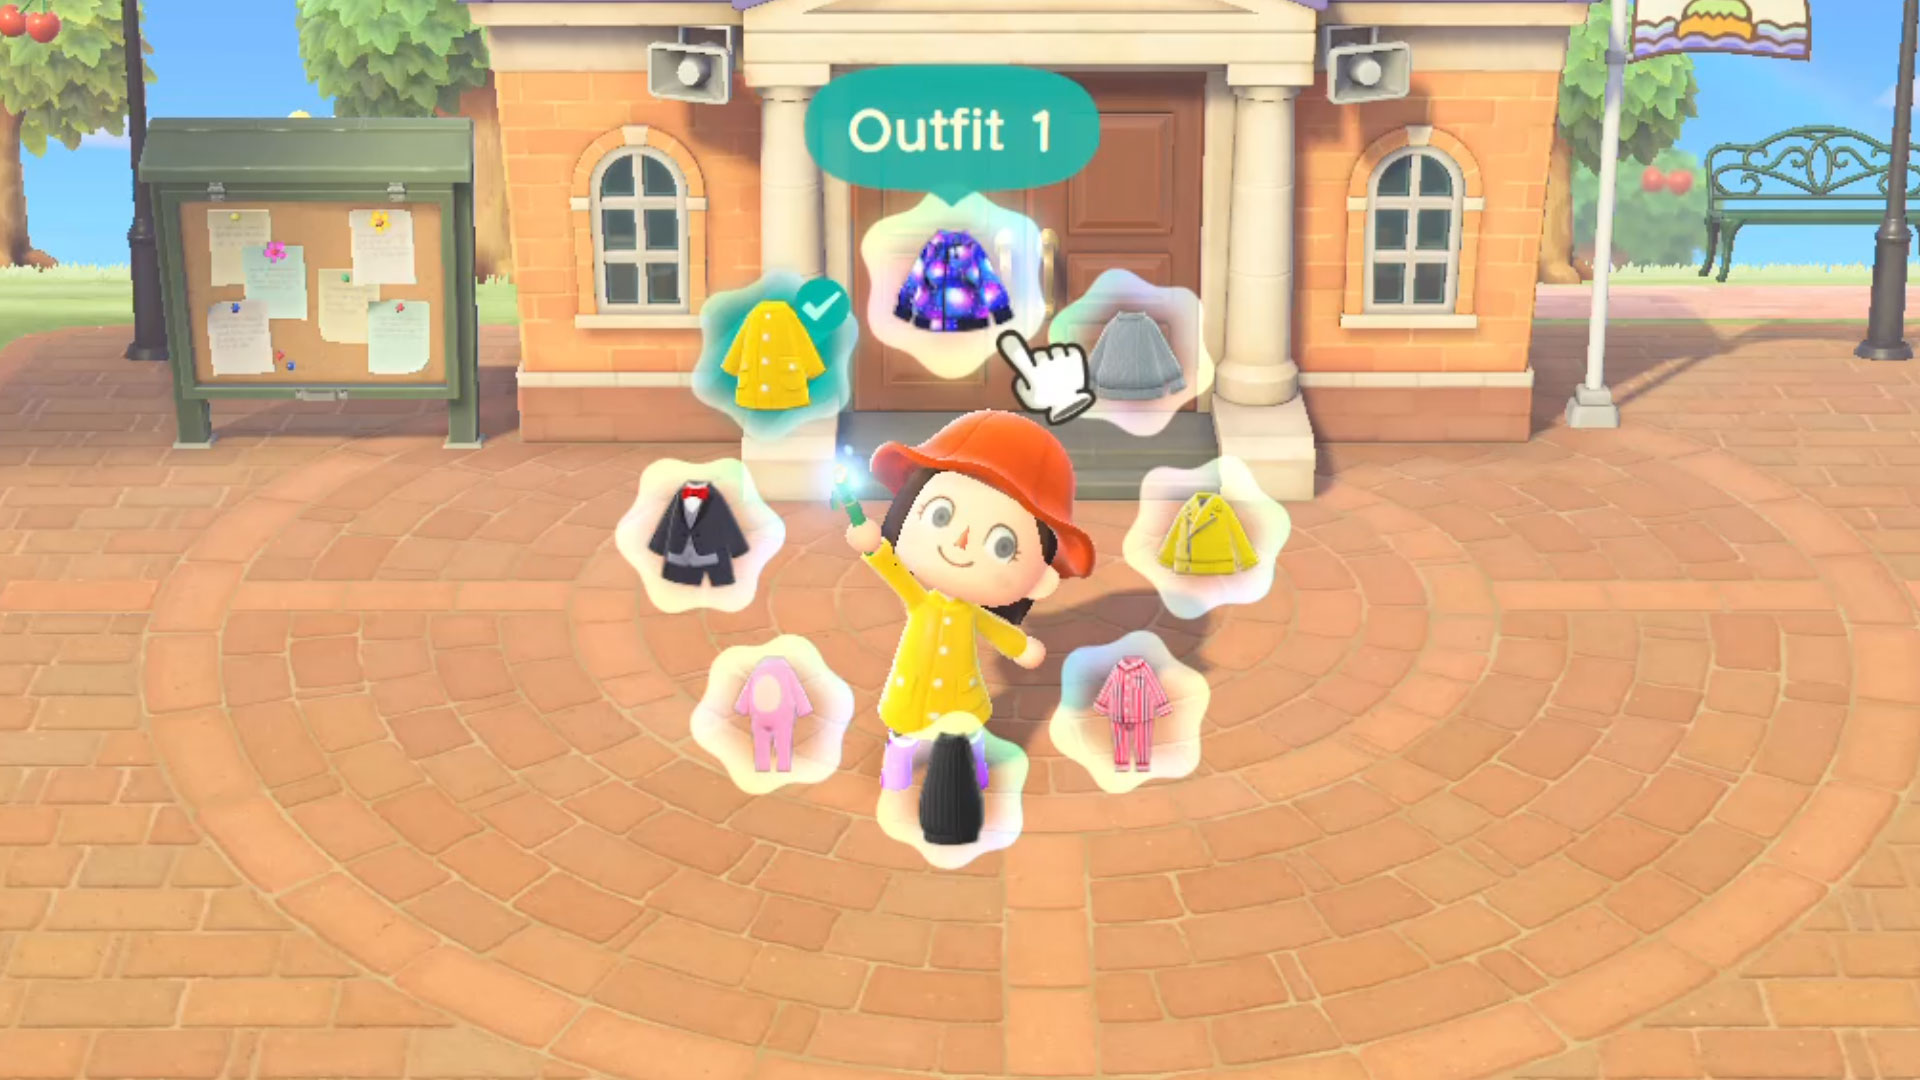 How to get the magic wand and star fragments in Animal Crossing: New